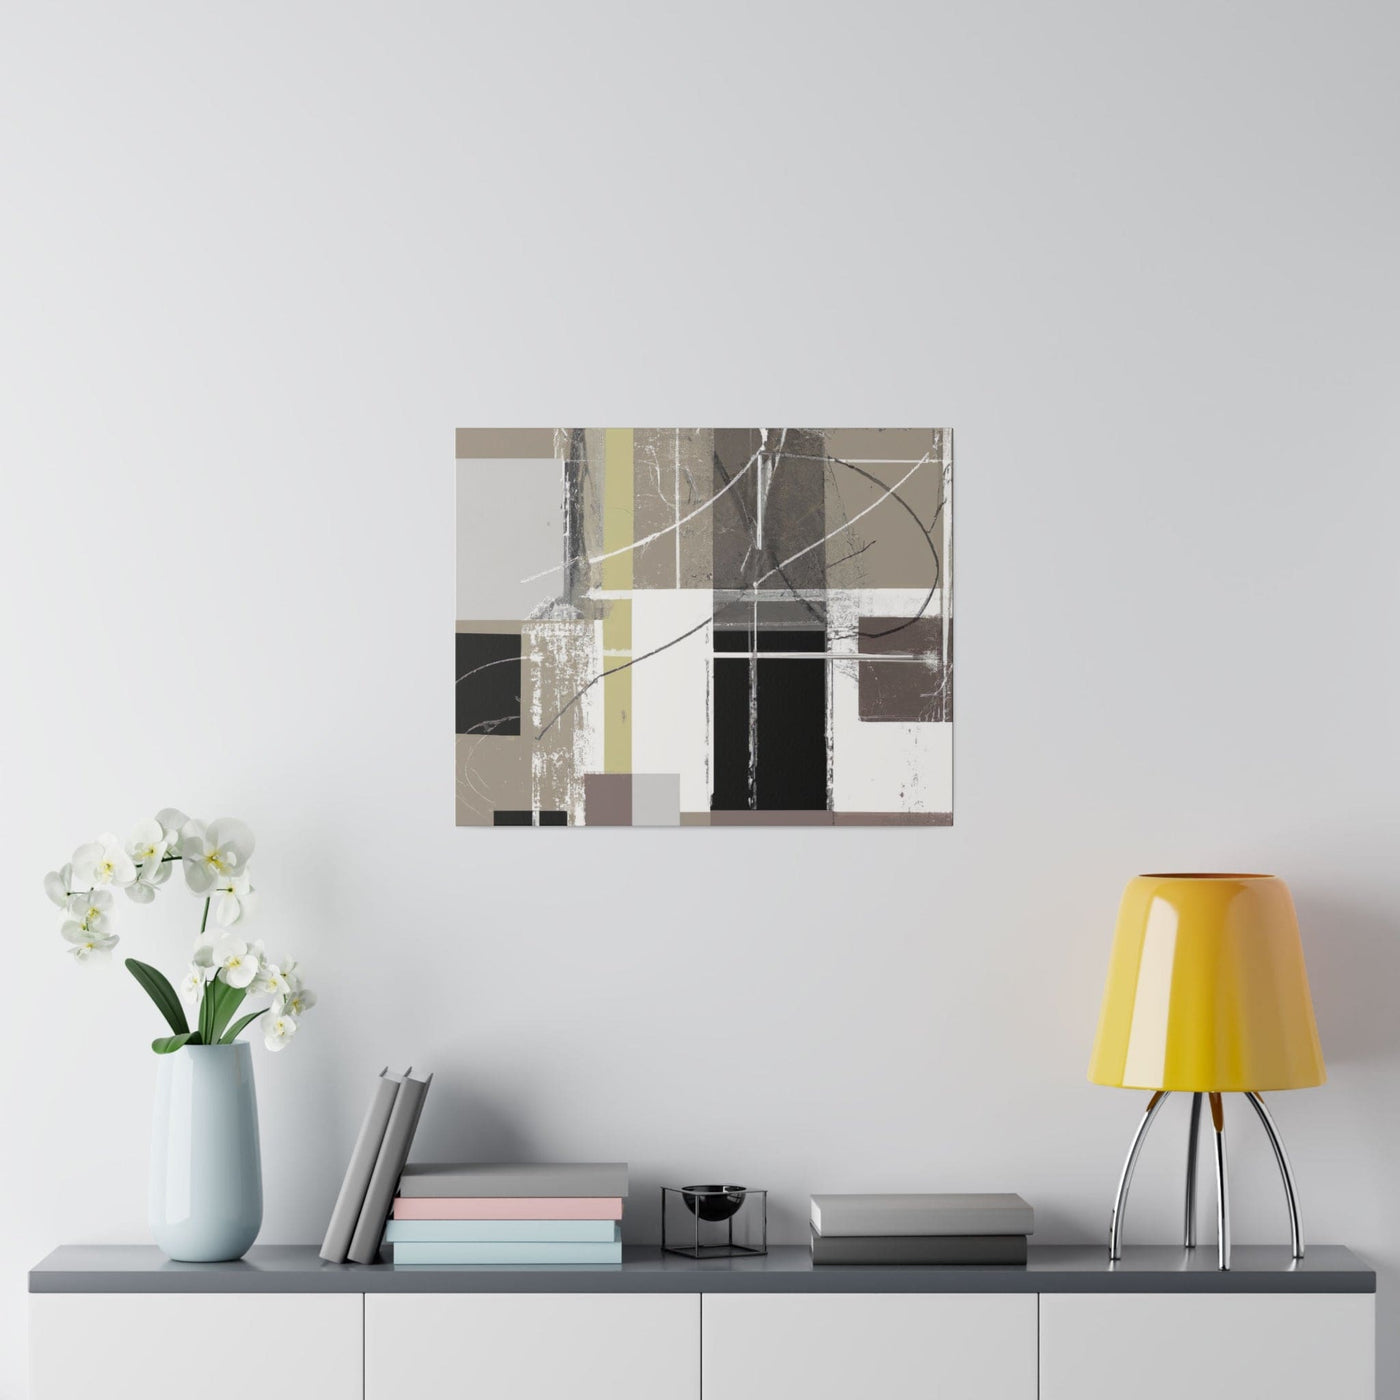 Wall Art Poster Print for Living Room Office Decor Bedroom Artwork Abstract